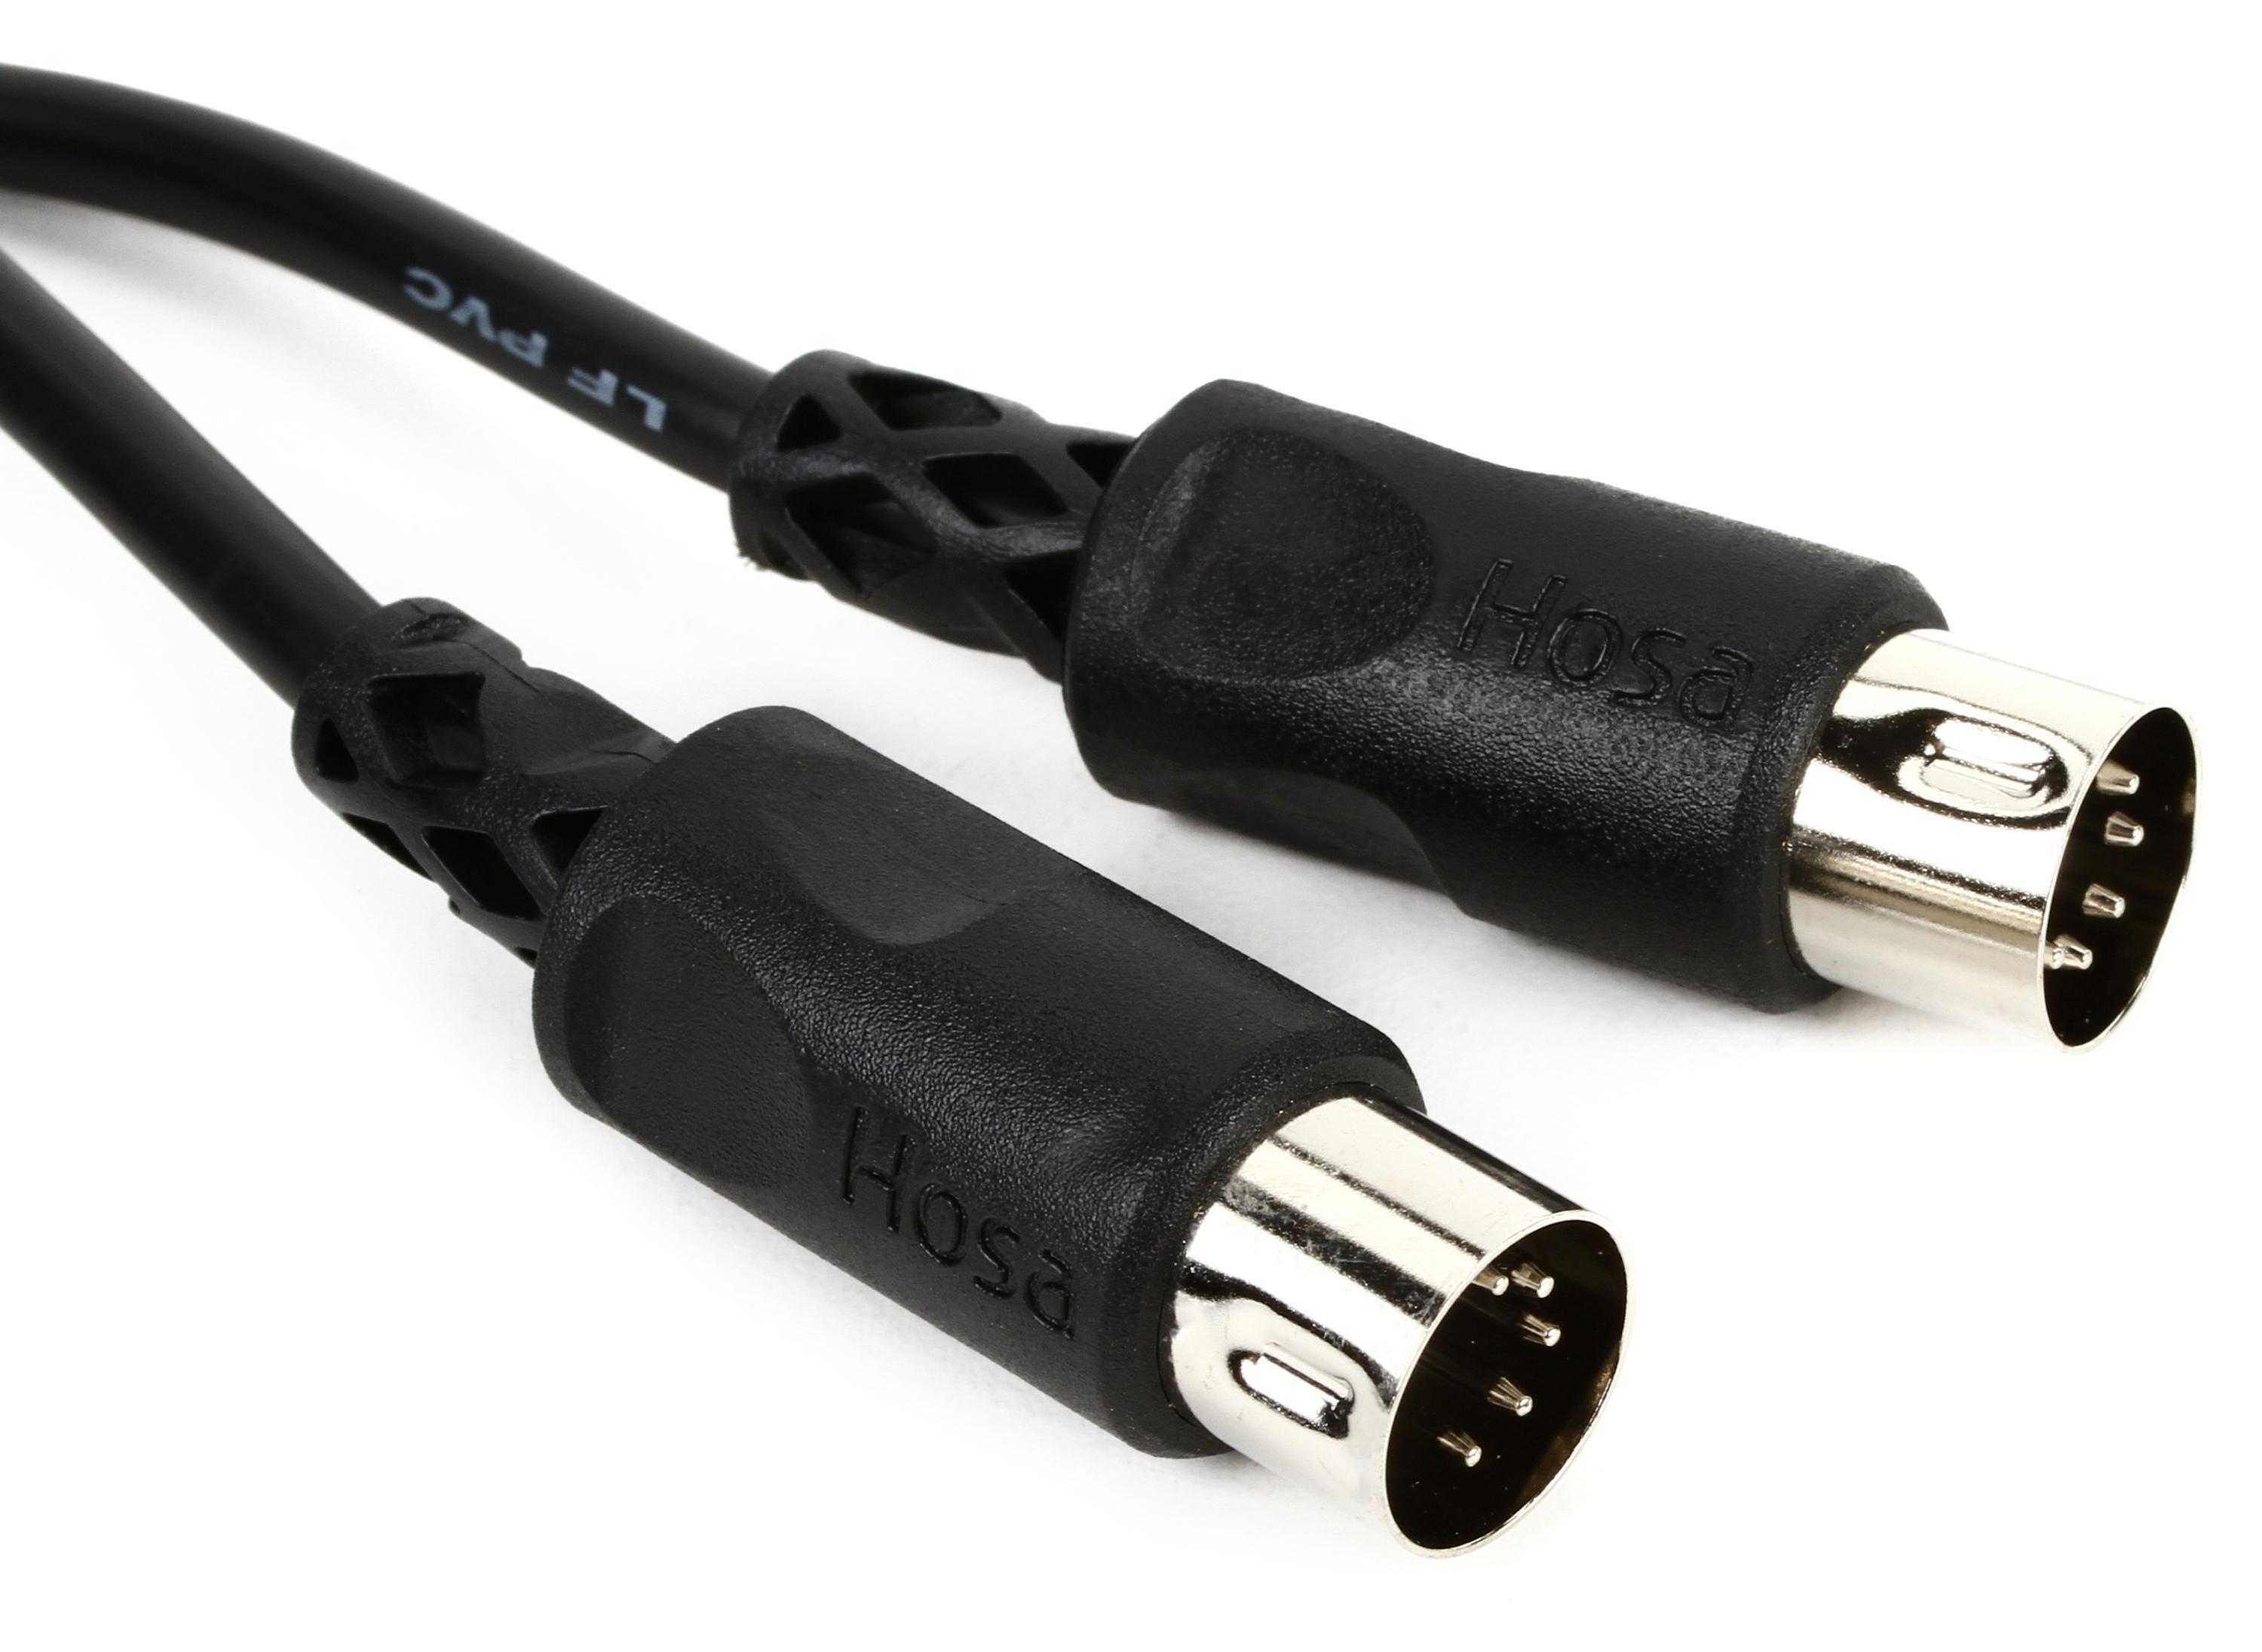 MIDI Cable with 5 Pin DIN Plugs 10 Feet (ft) Black (3 Pack)